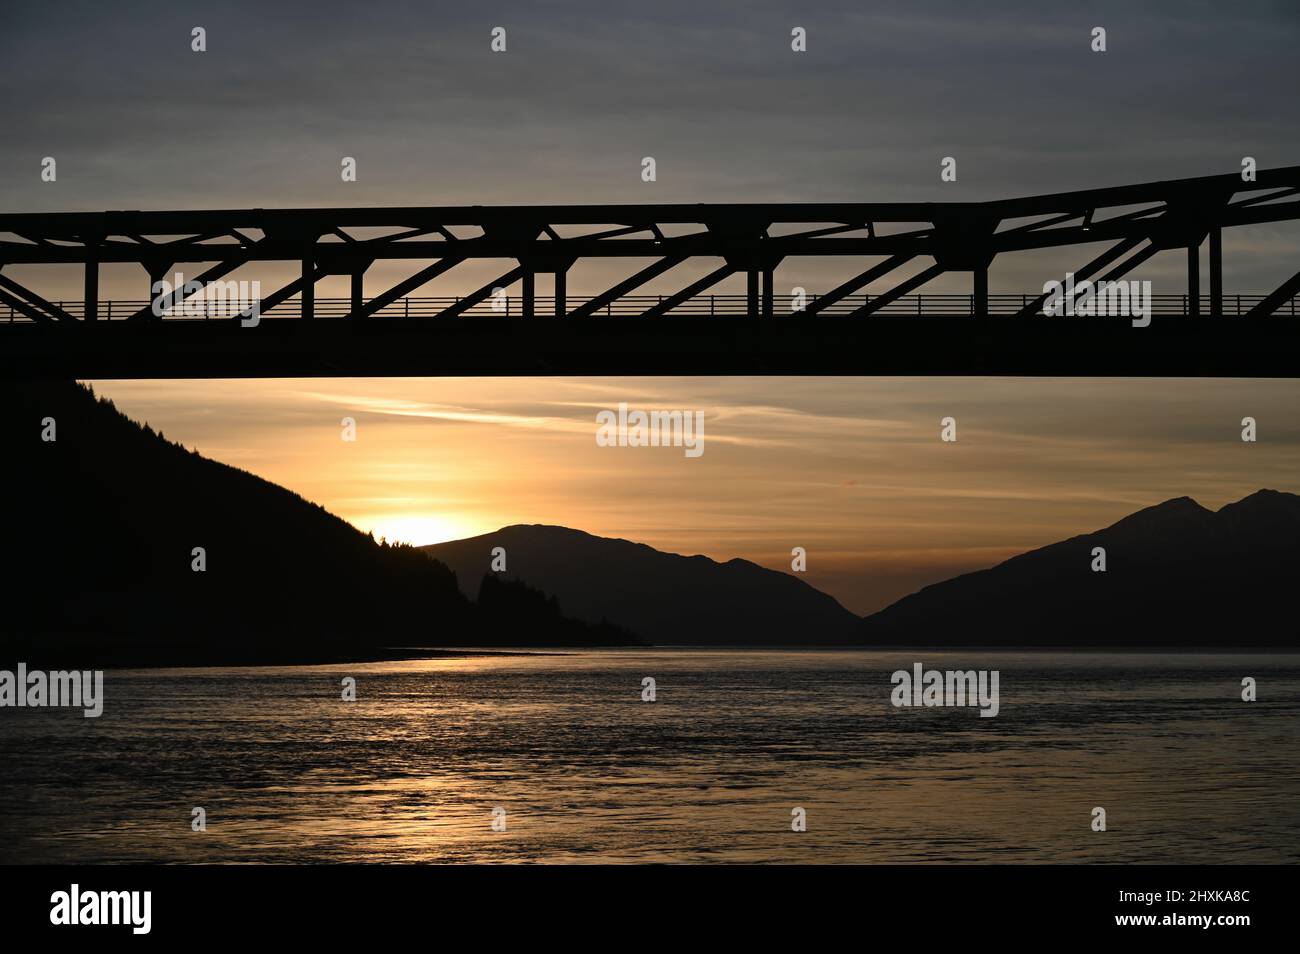 Ballachulish Bridge in Scottish Highlands at sunset with loch and mountains in view. Stock Photo